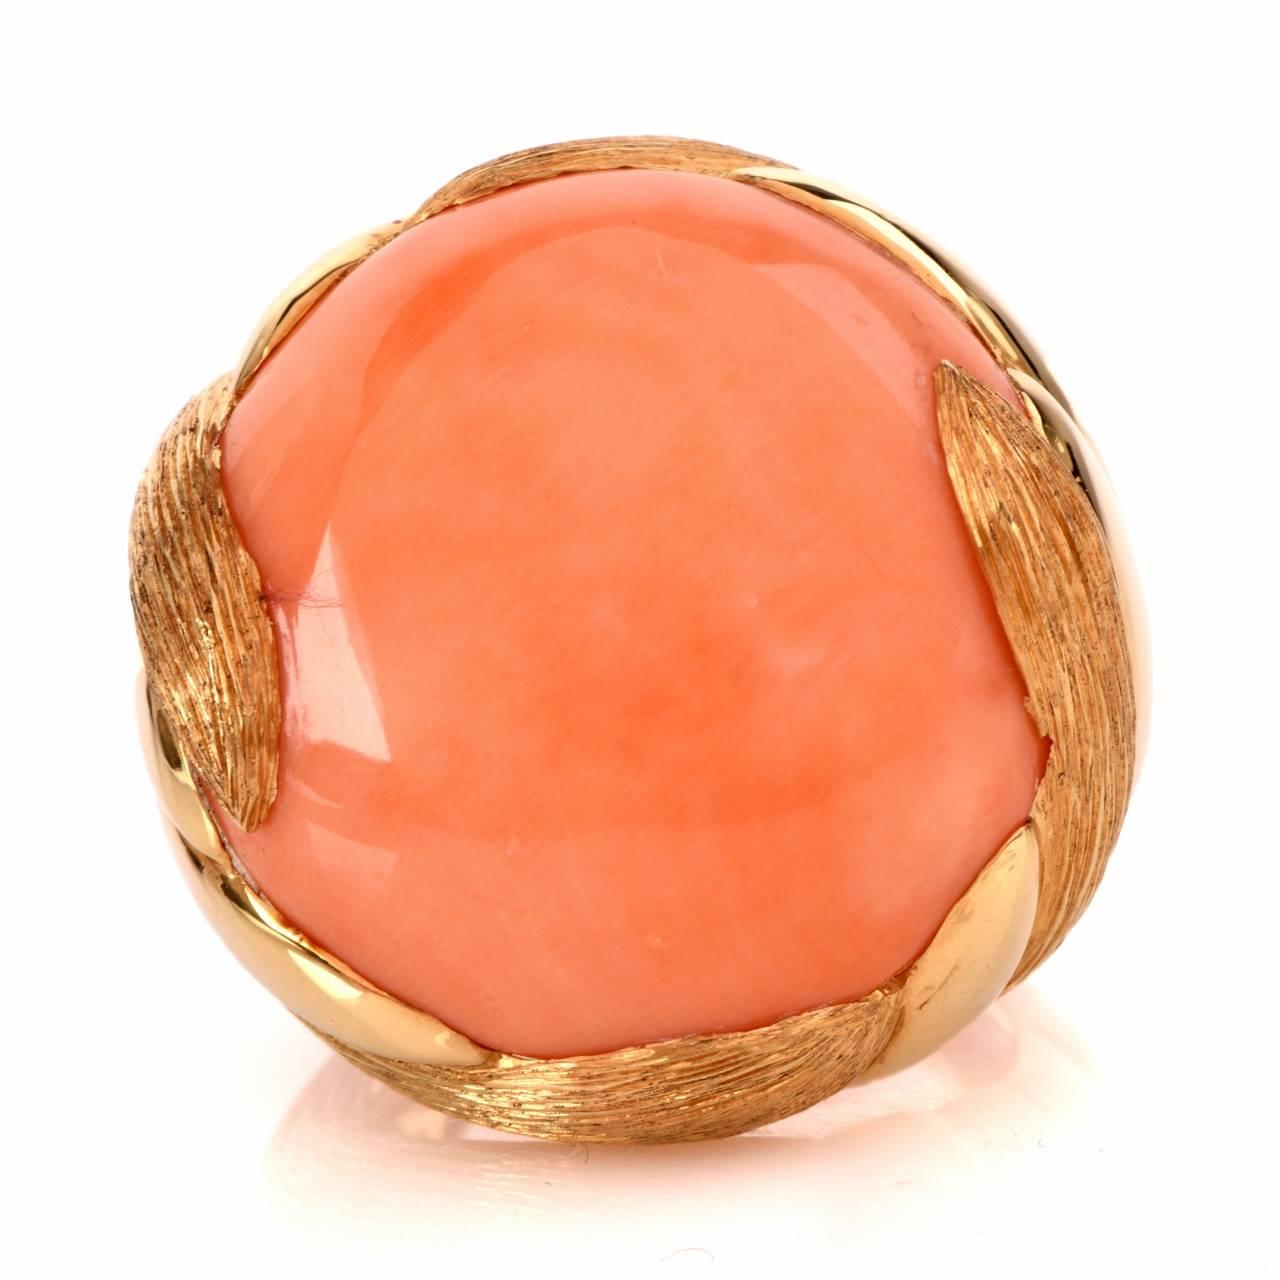 This estate Retro cocktail ring of opulent design is crafted in a combination of matted and polished 18K yellow gold, weighs 27.4 grams. The ring measures 26 mm wide x 10 mm high. This quintessentially Retro design cocktail ring exposes a round